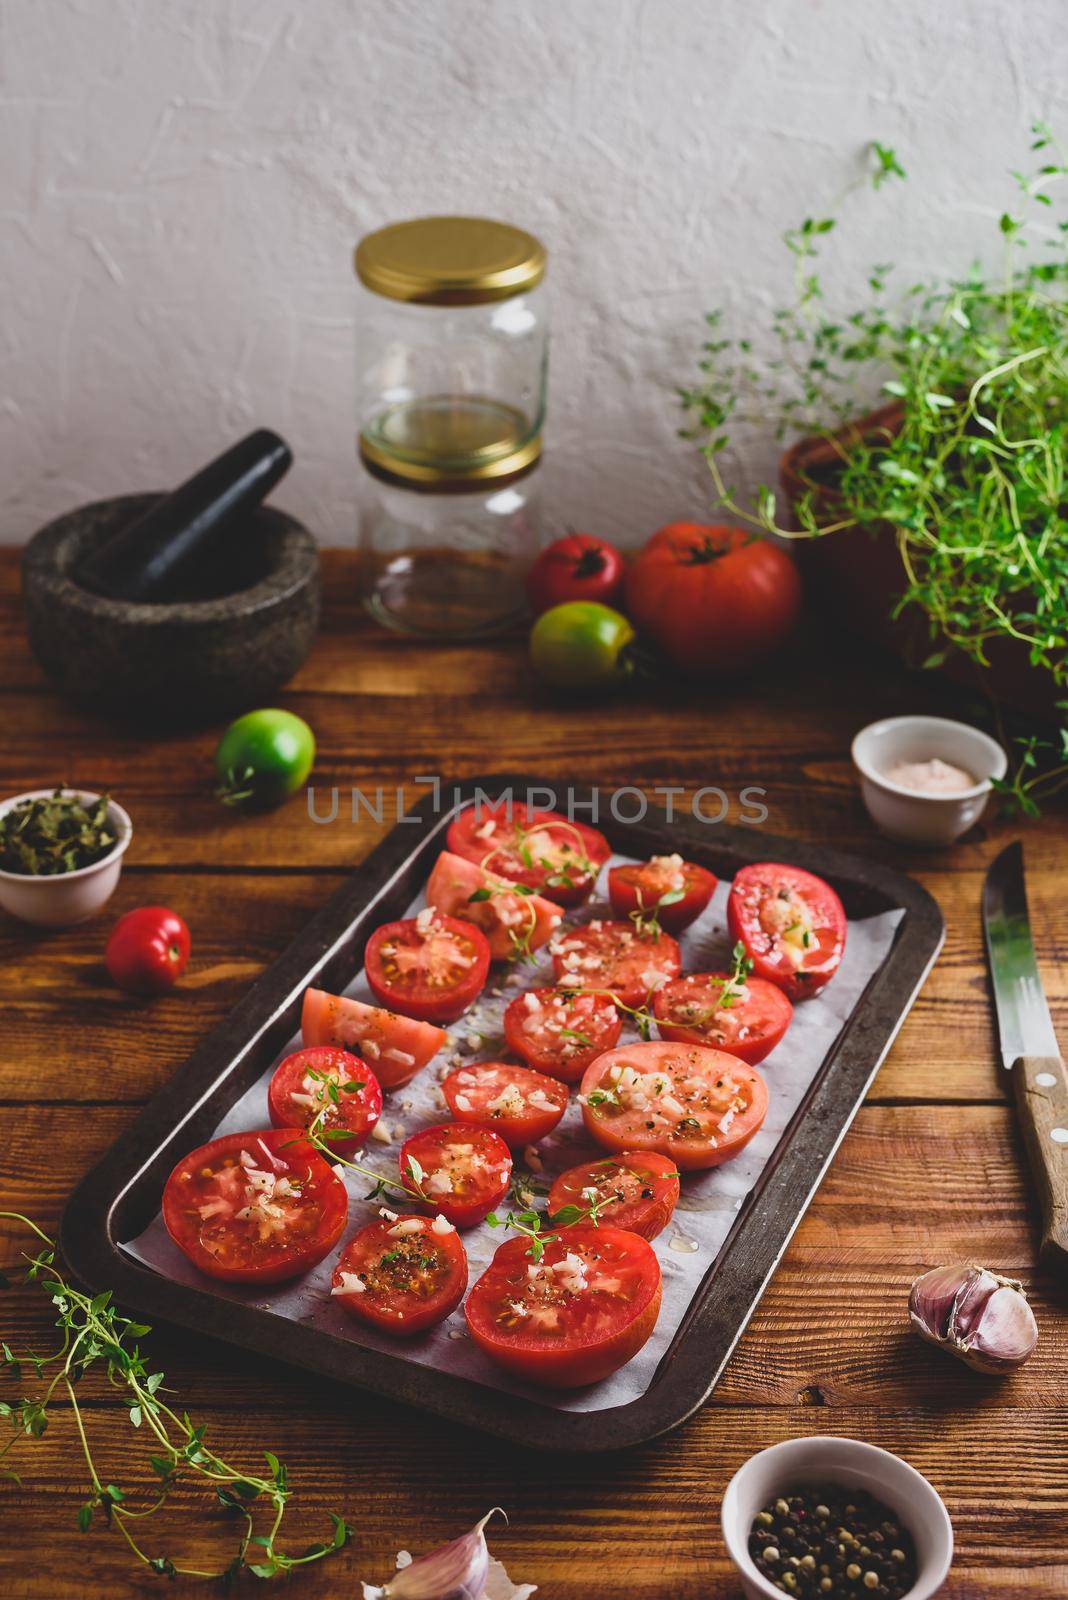 Sliced Tomatoes with Thyme and Garlic on Baking Dish Ready for Cooking